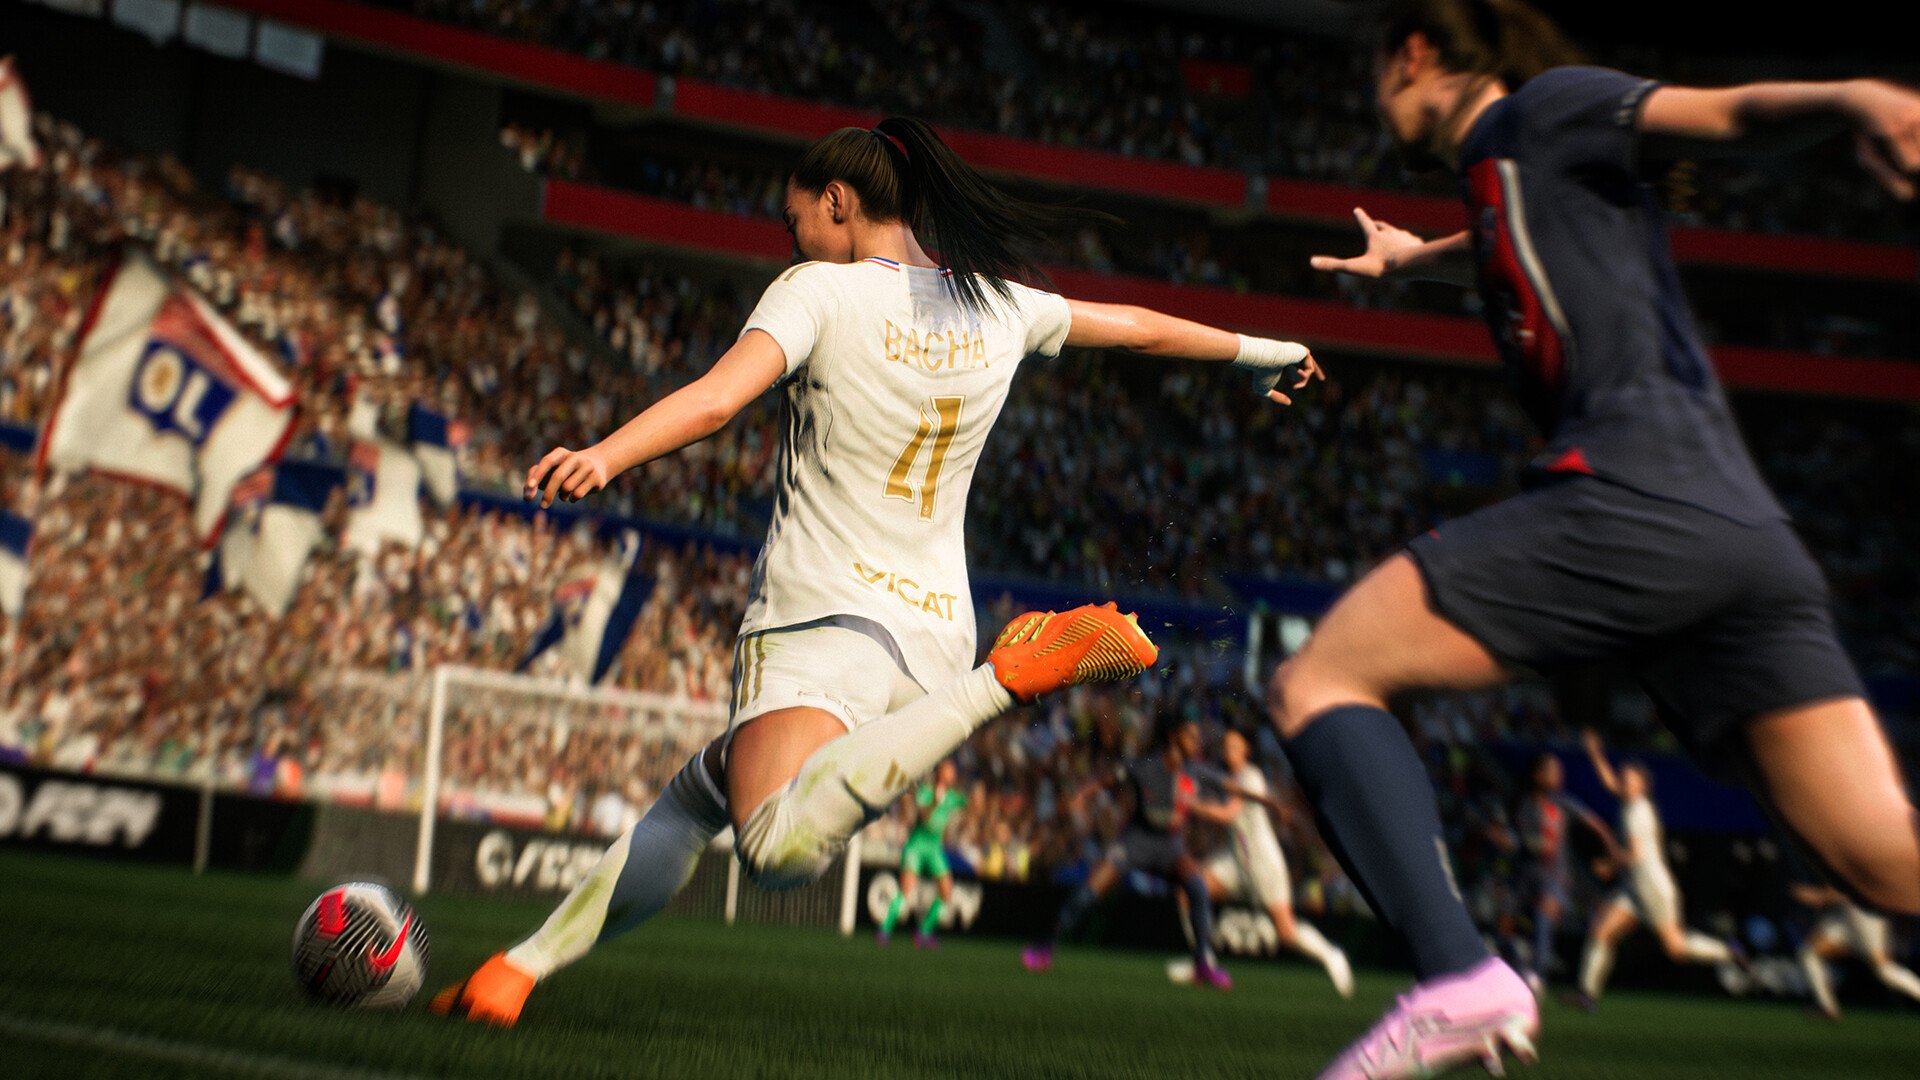 Comparing FC 24's launch to FIFA 23's